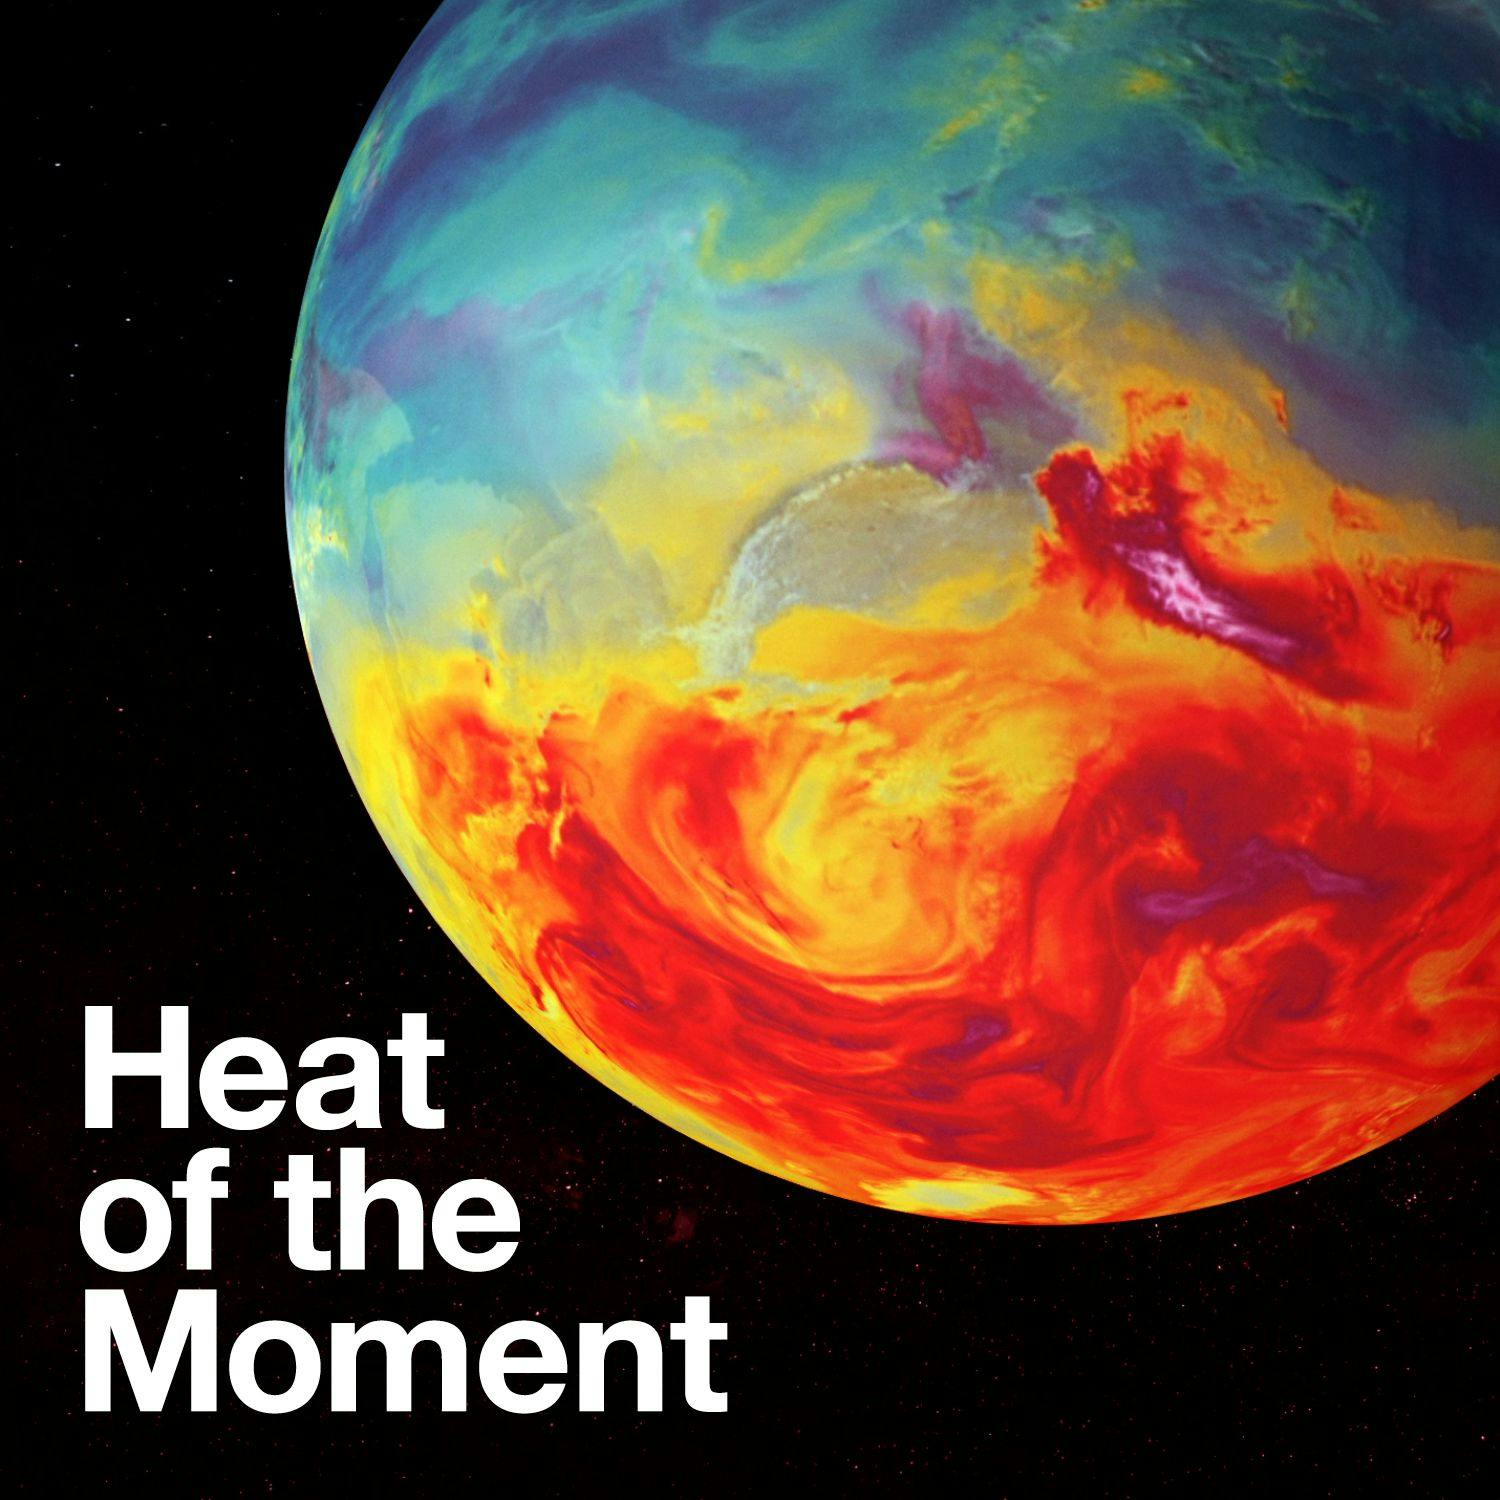 COMING SOON—Heat of the Moment: A Just Transition